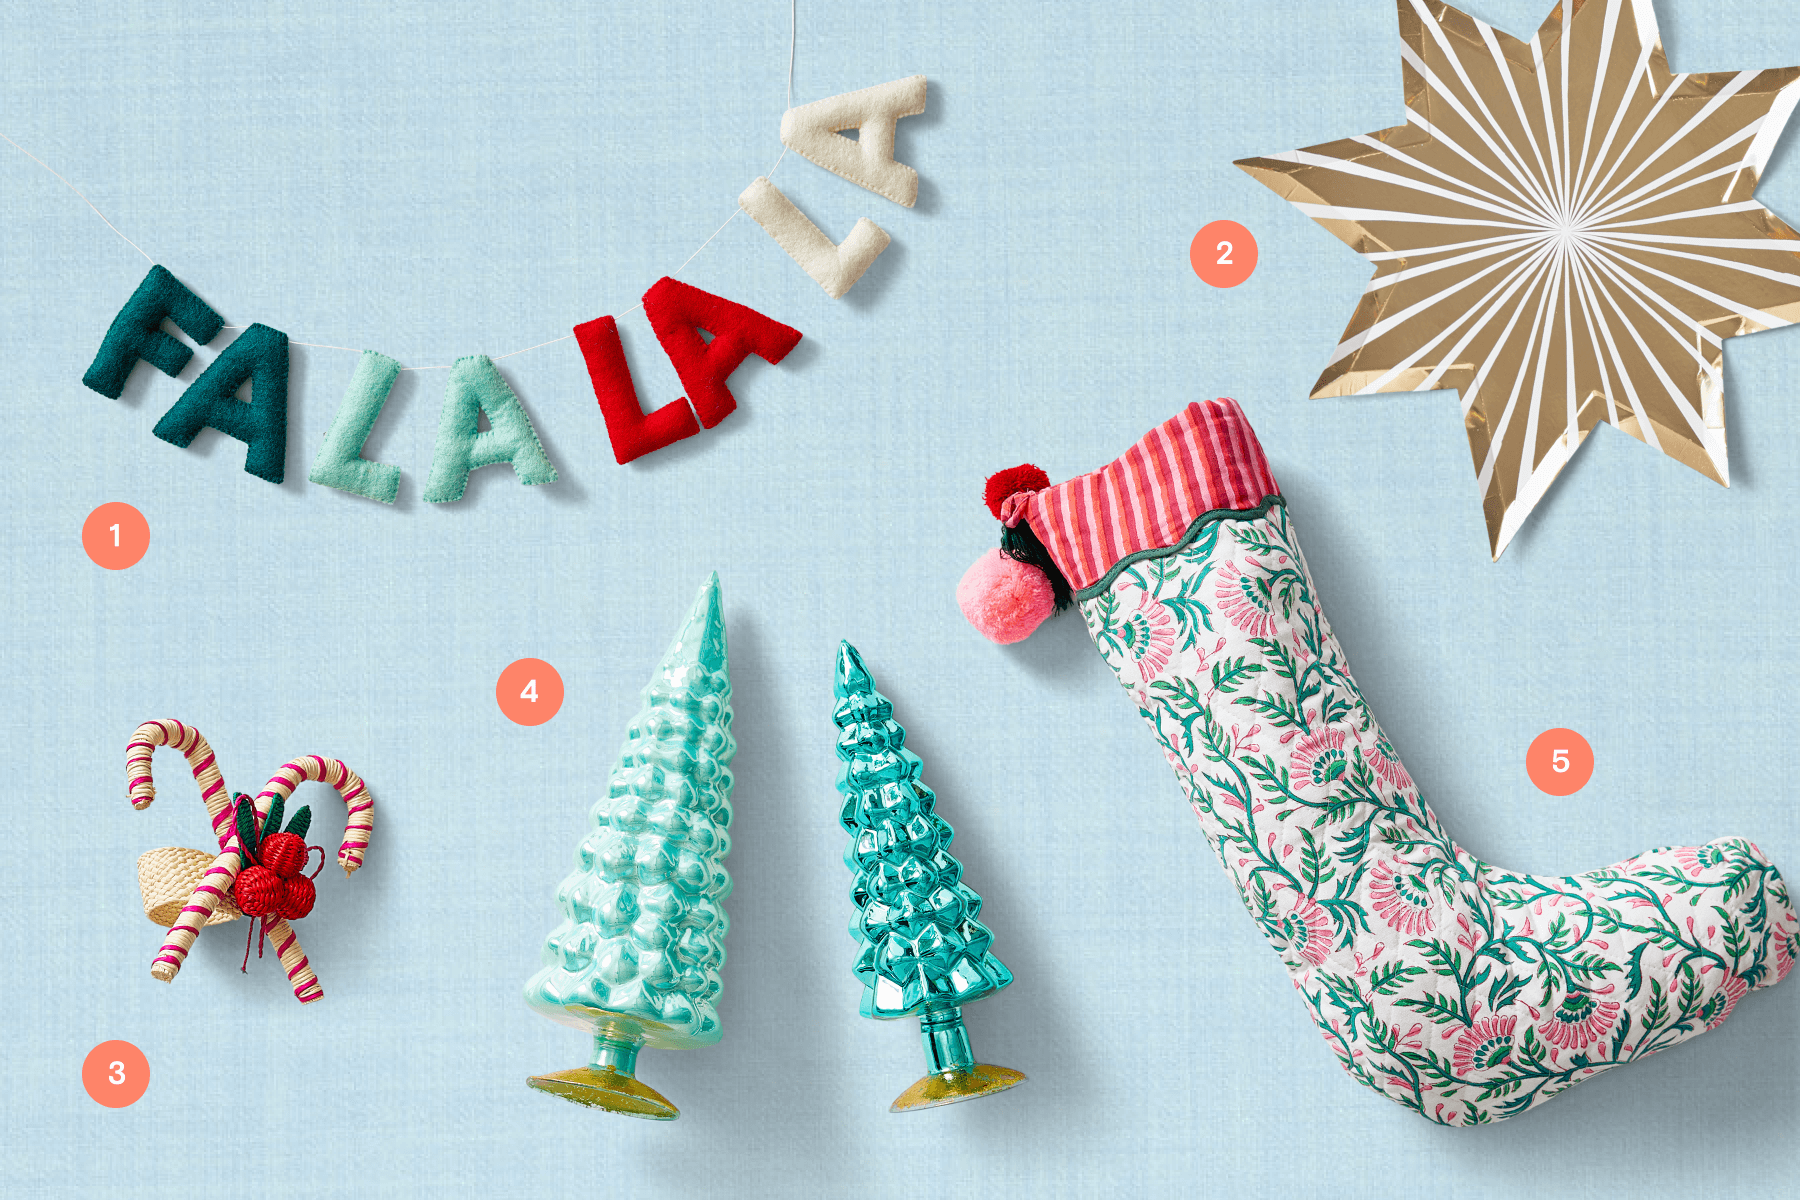 Christmas decorations, party supplies, and a stocking on a blue backdrop. 